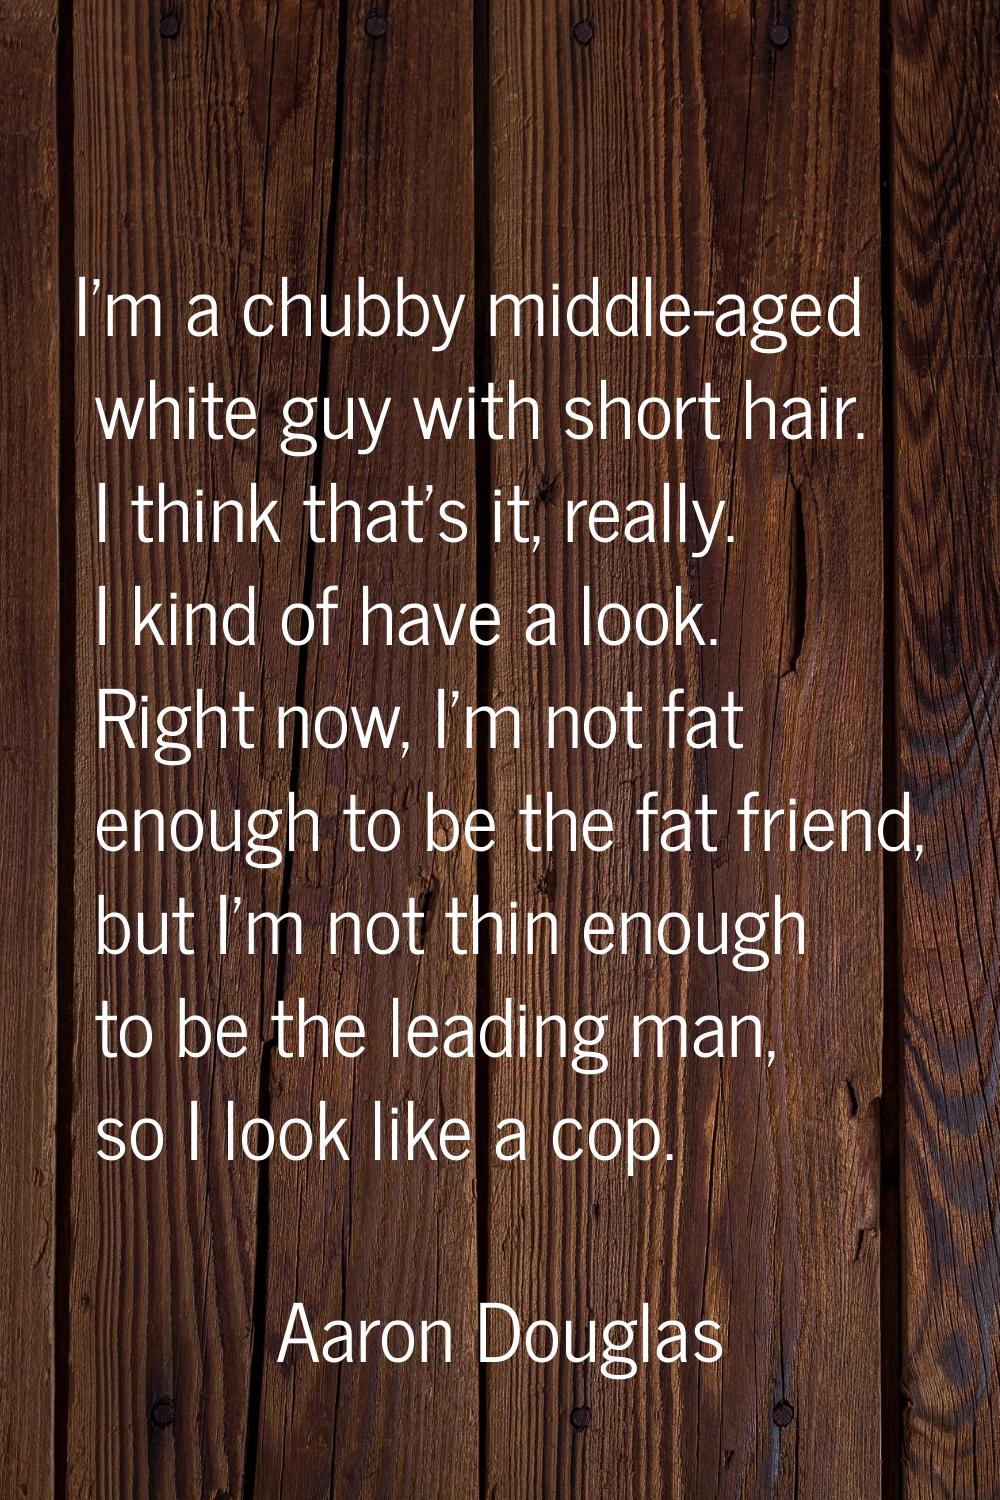 I'm a chubby middle-aged white guy with short hair. I think that's it, really. I kind of have a loo